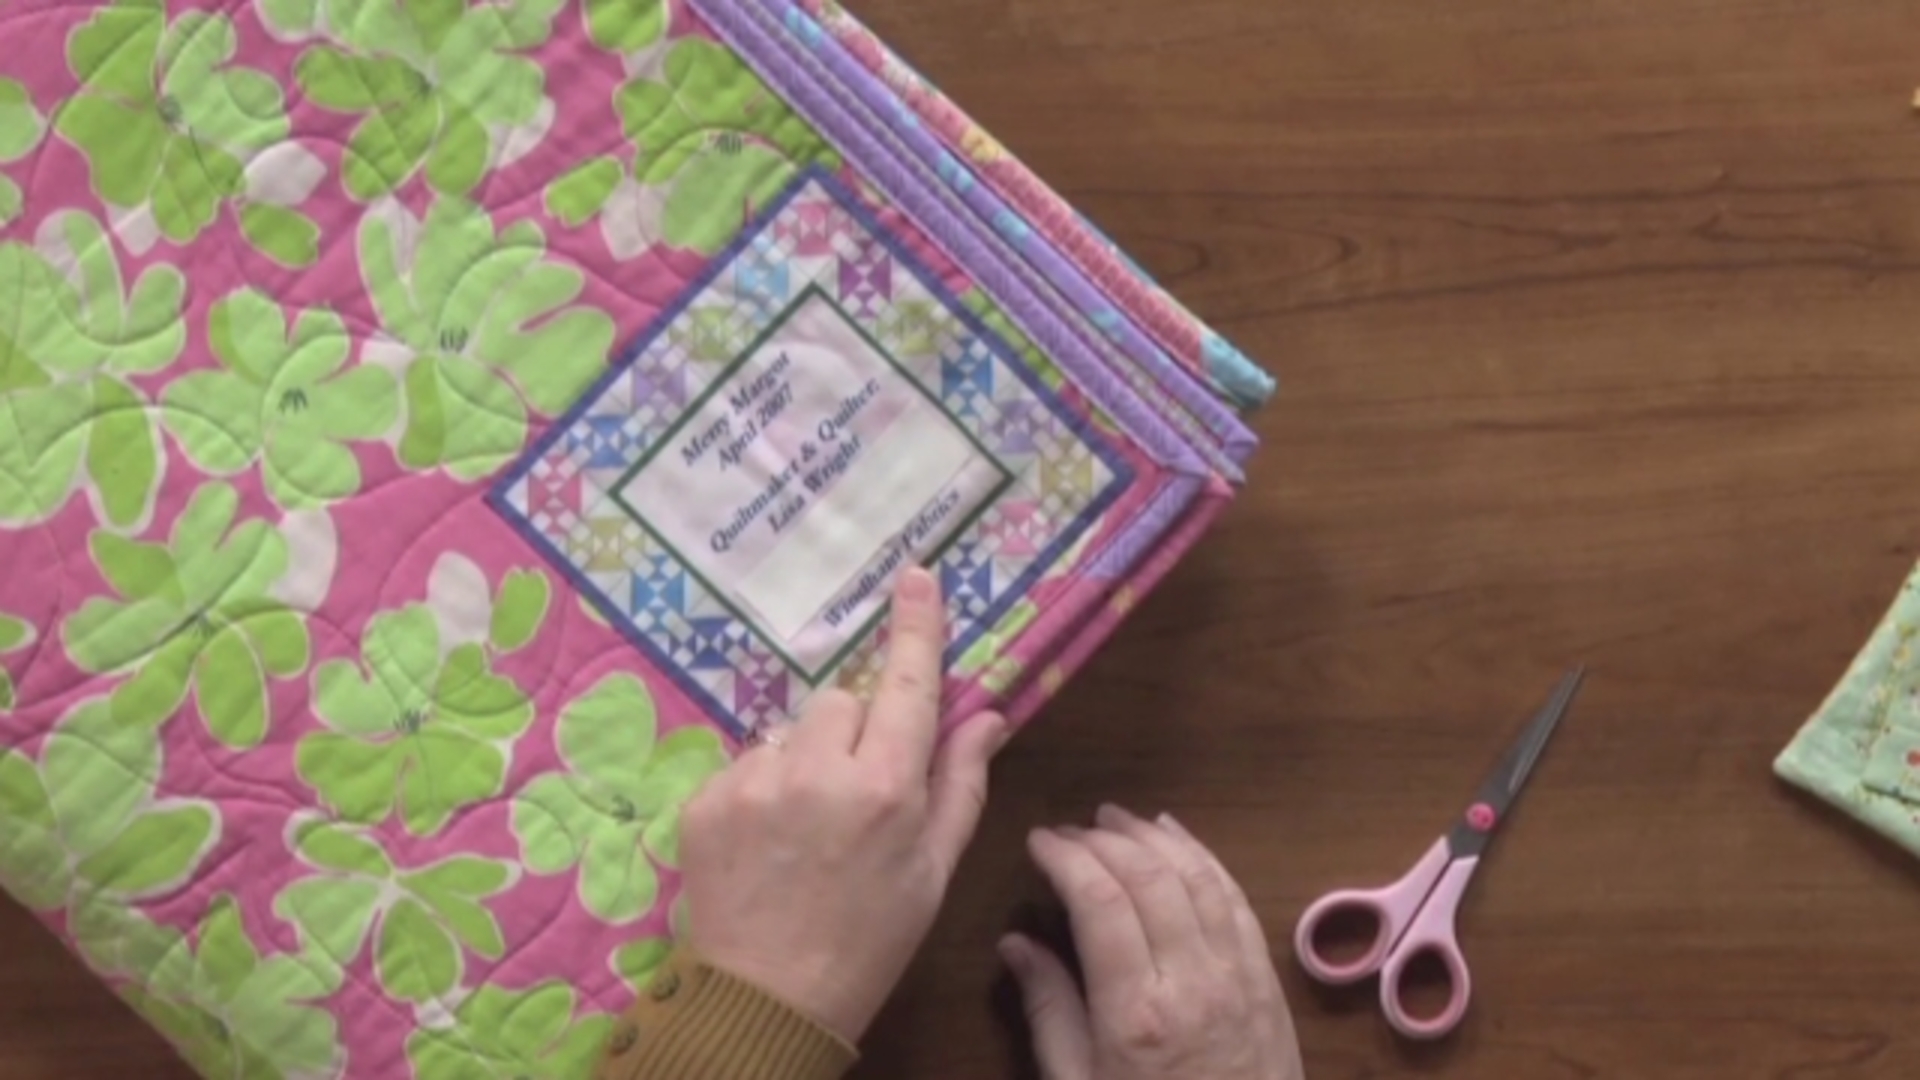 How To: Quilt Fabric 